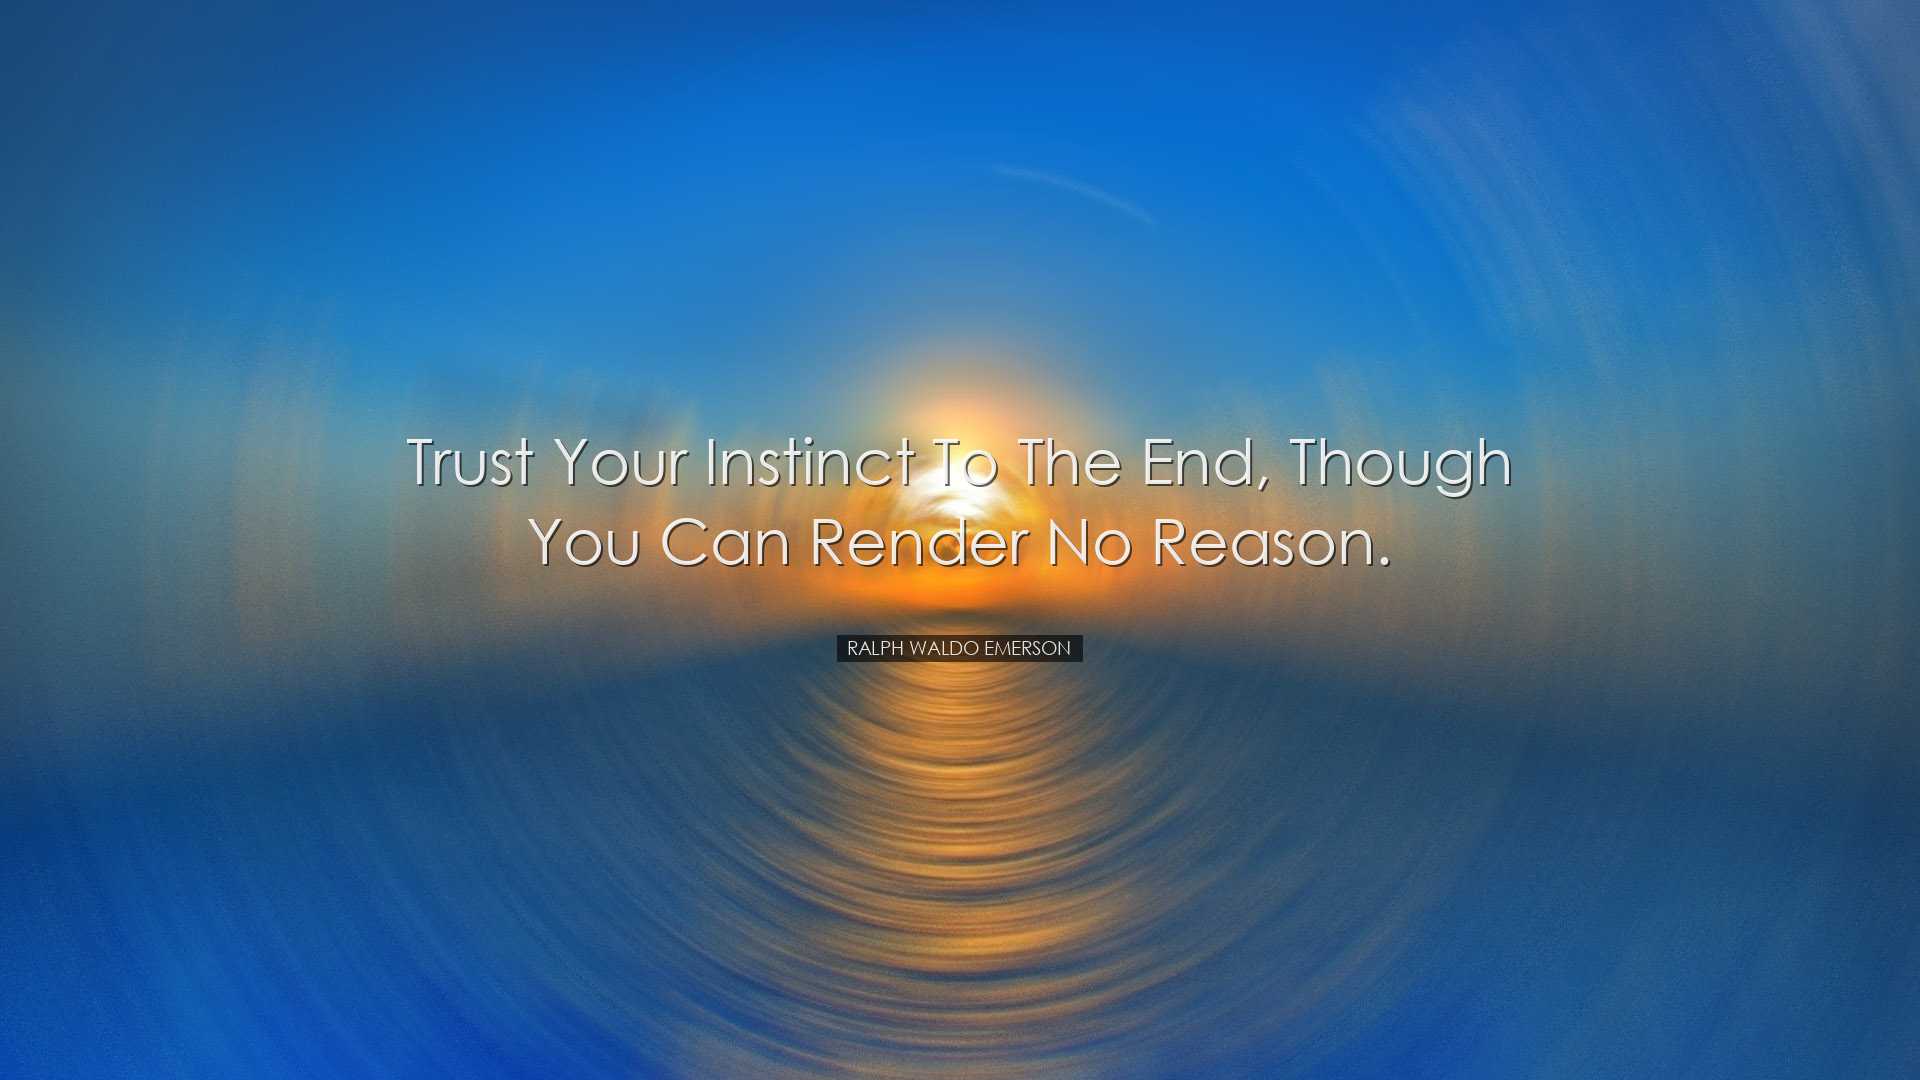 Trust your instinct to the end, though you can render no reason. -